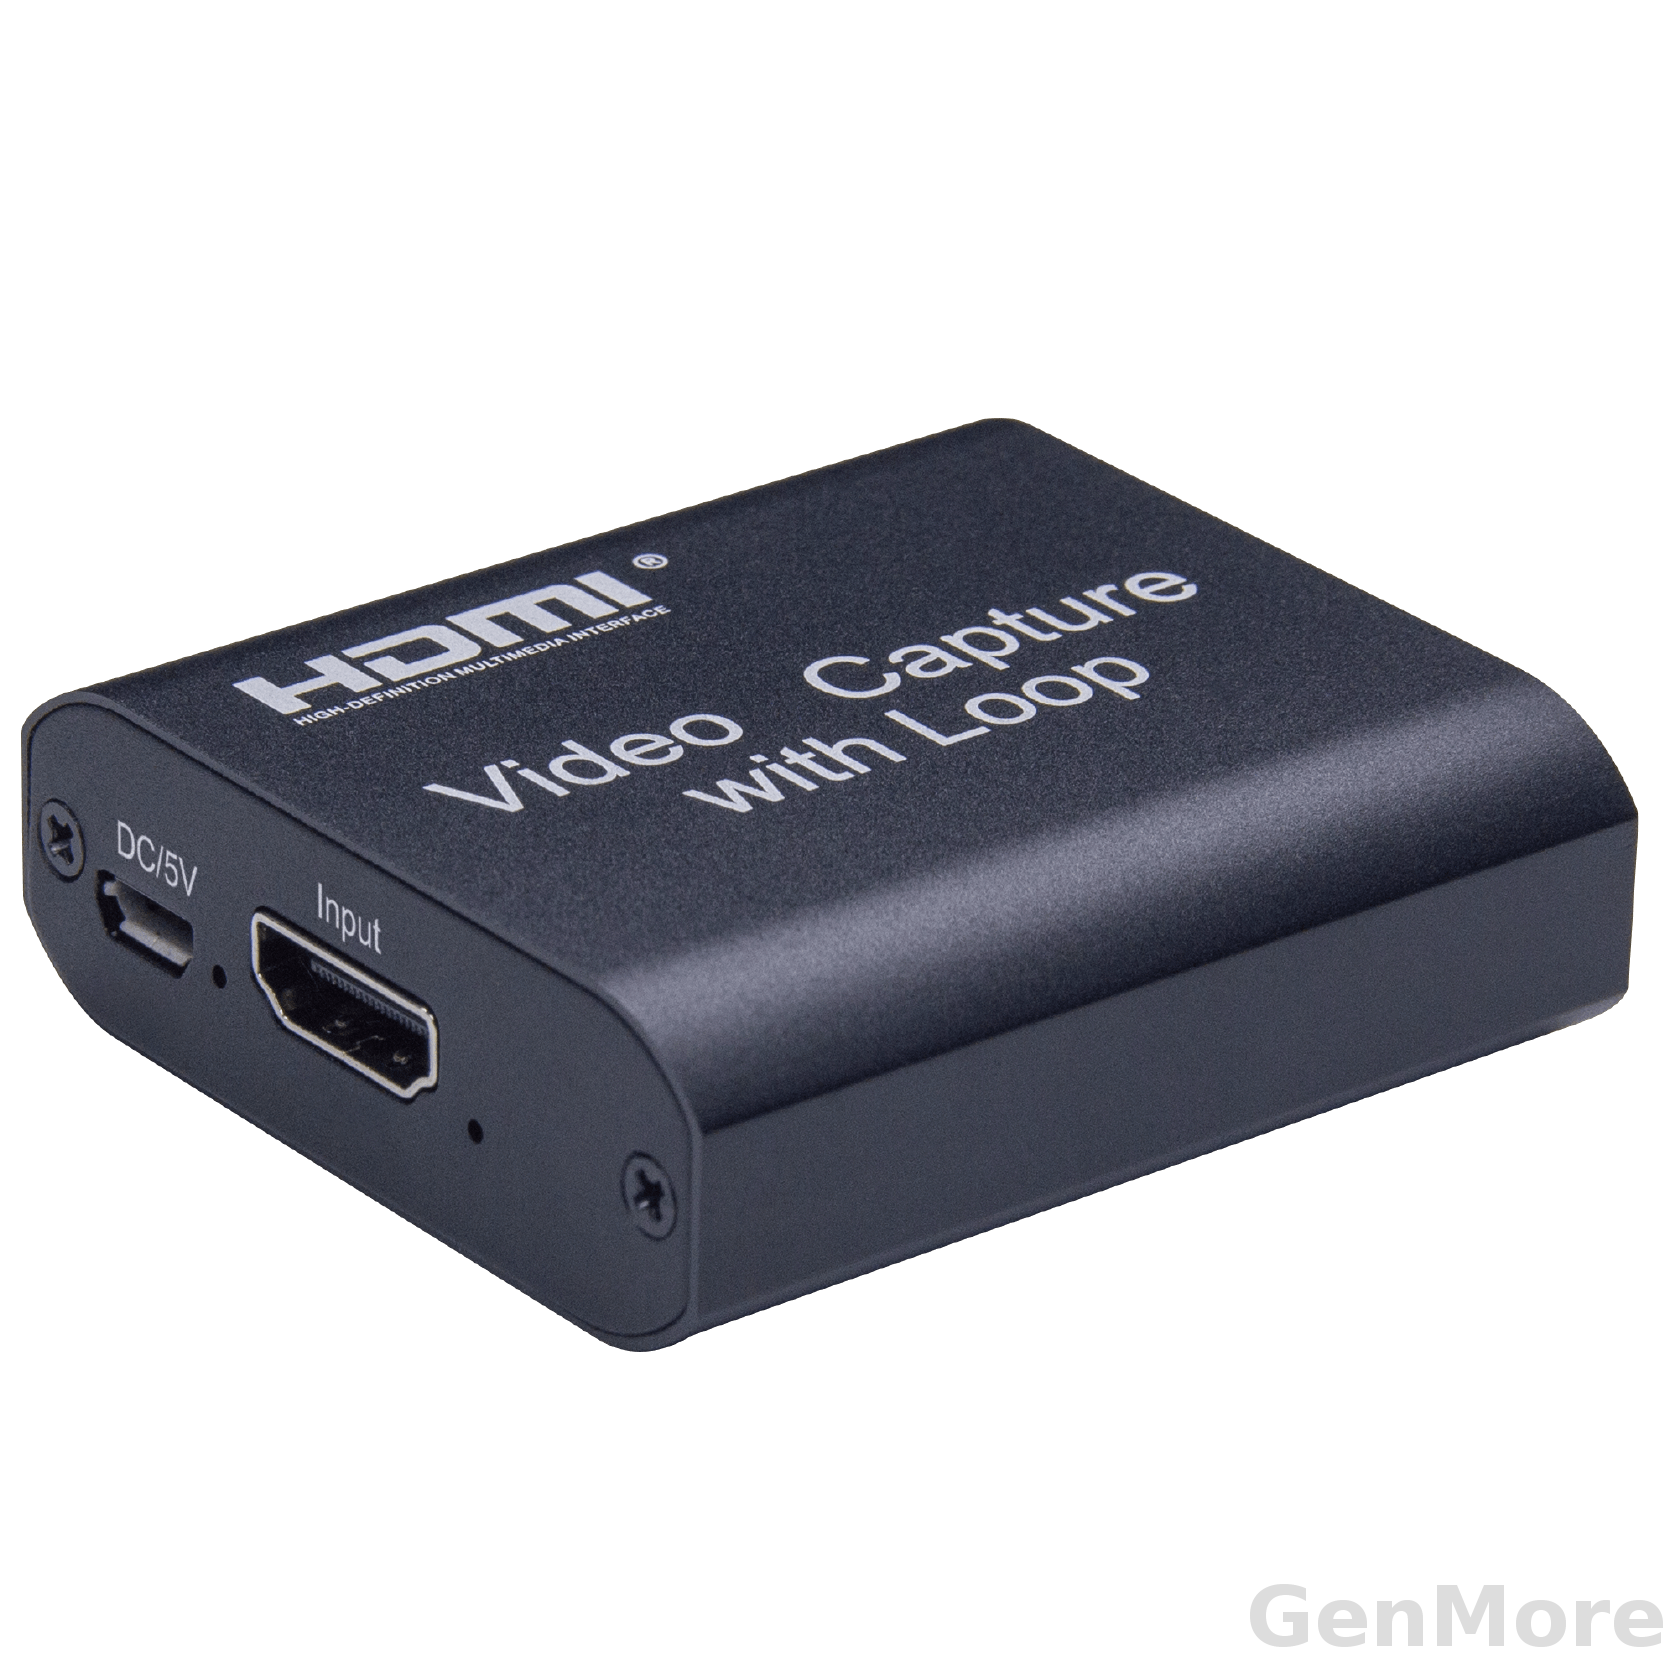 hdmi video capture device for mac